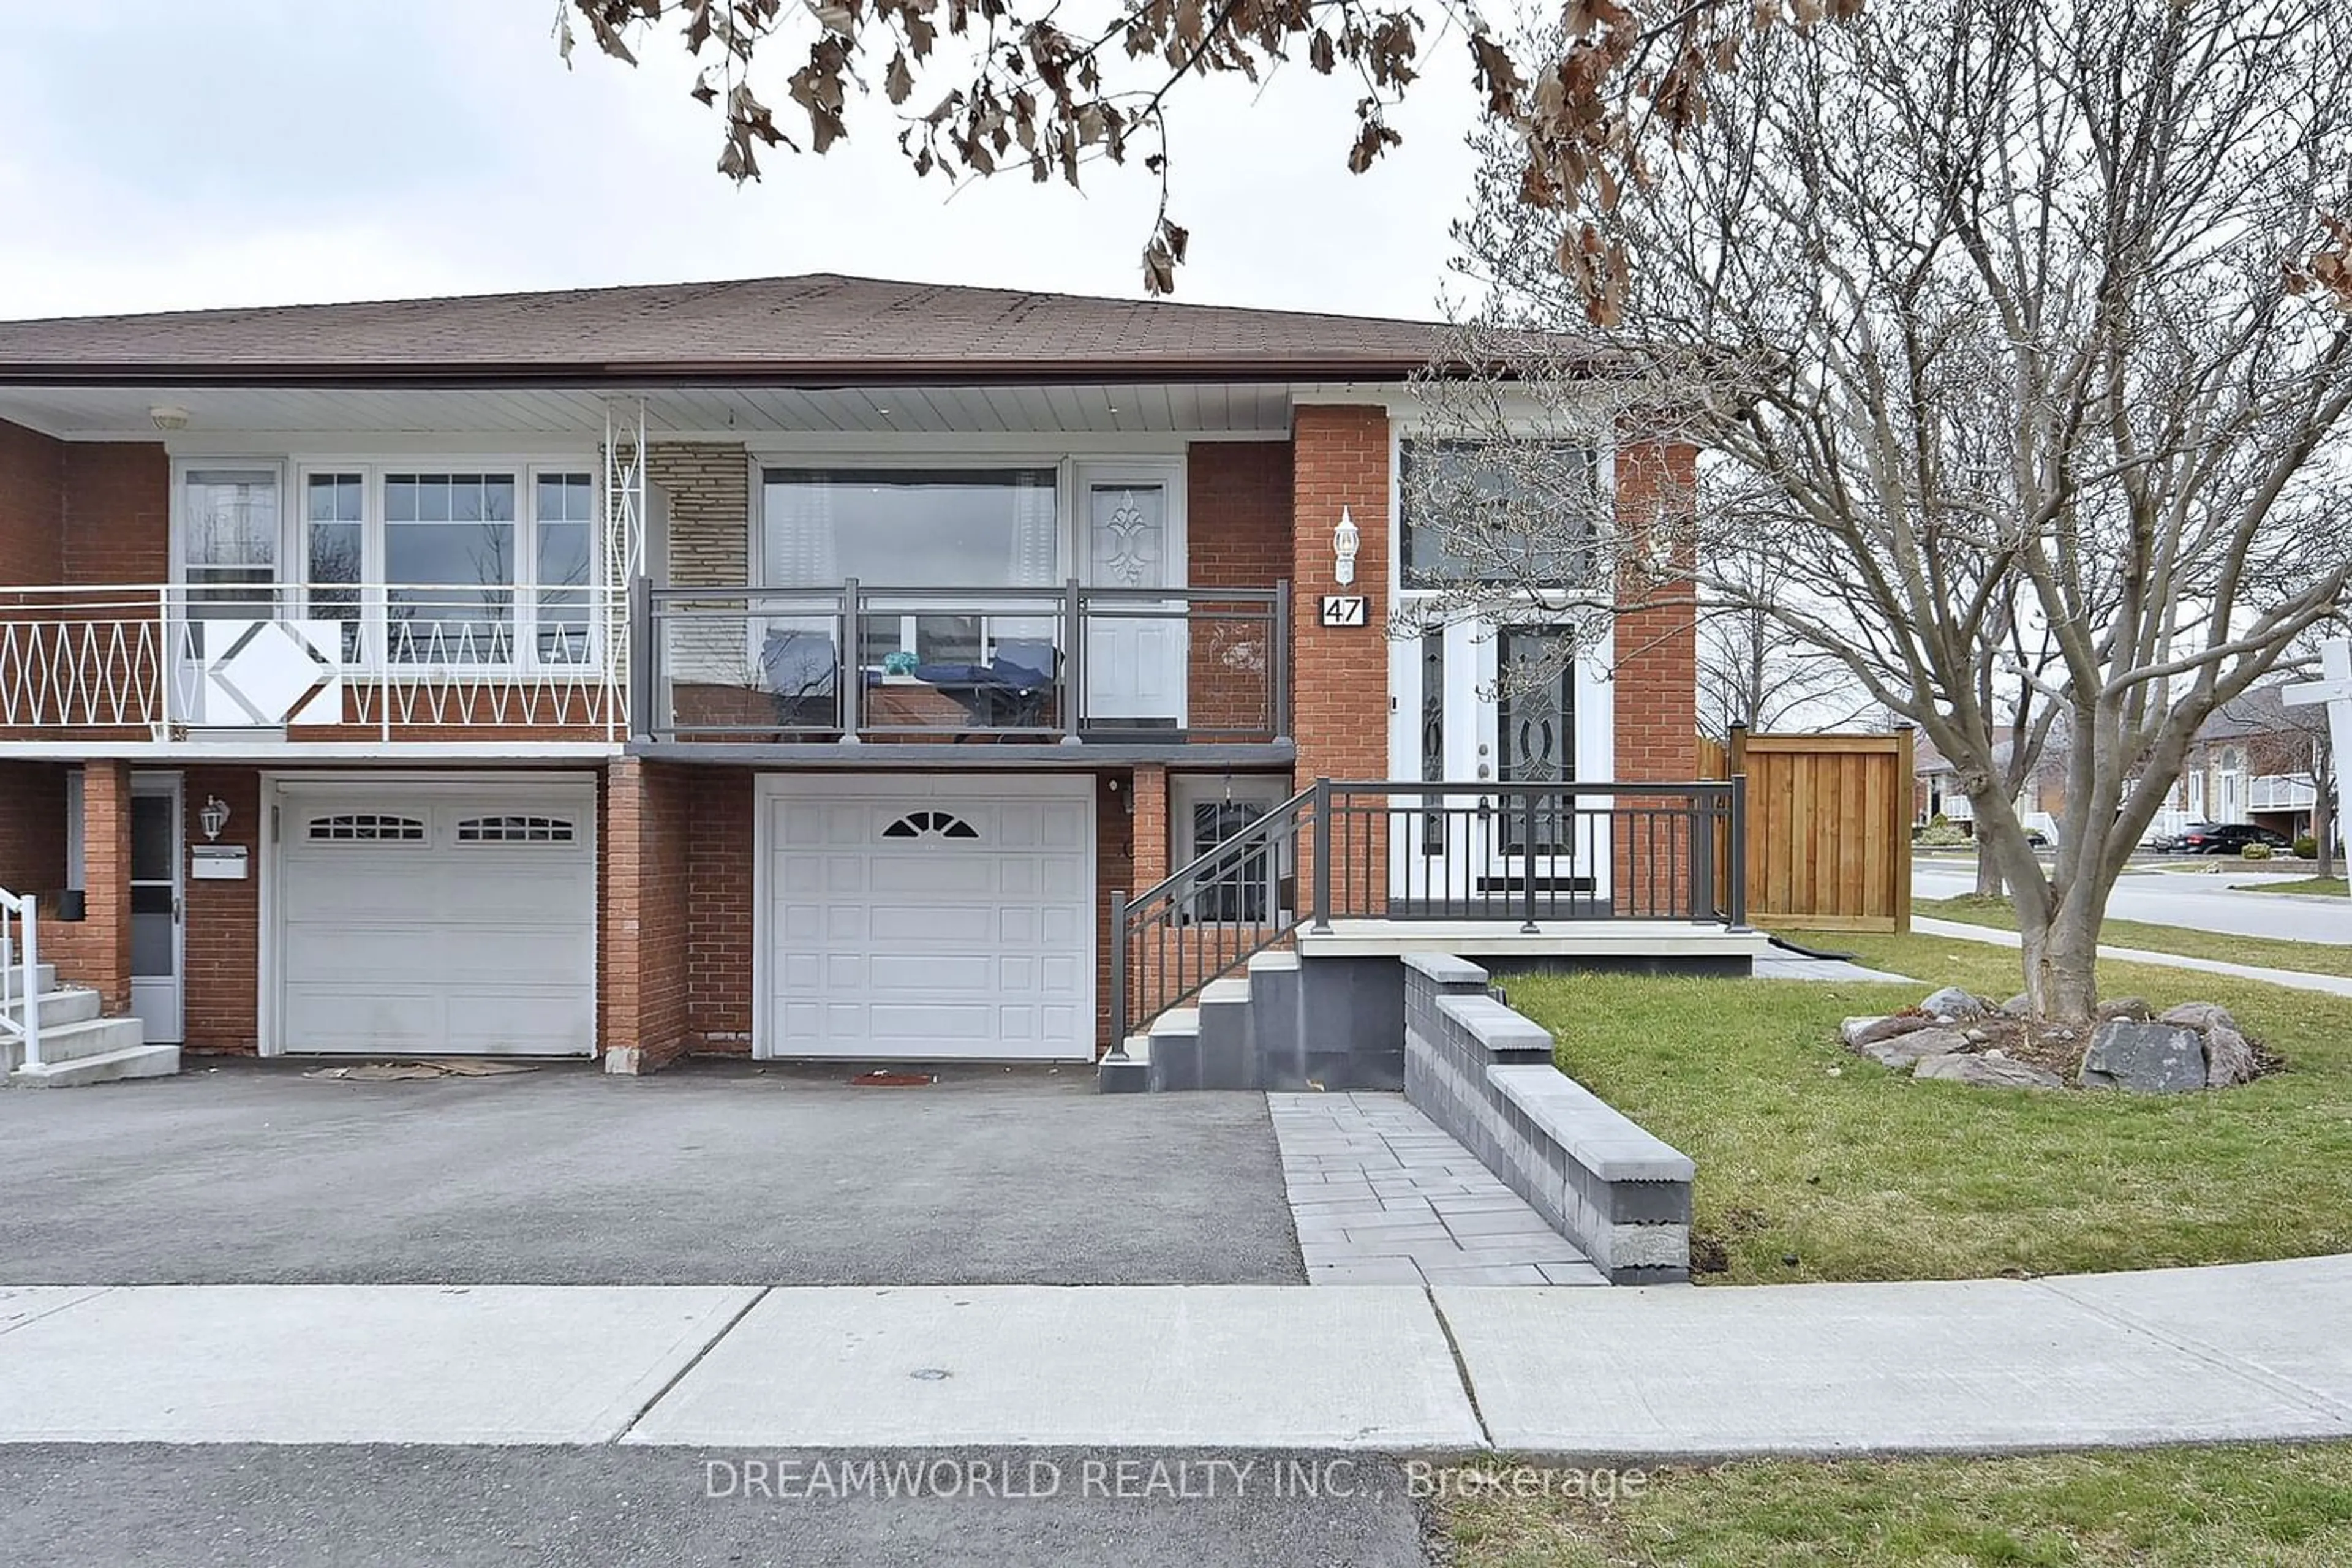 Home with unknown exterior material for 47 Cabana Dr, Toronto Ontario M9L 1L1